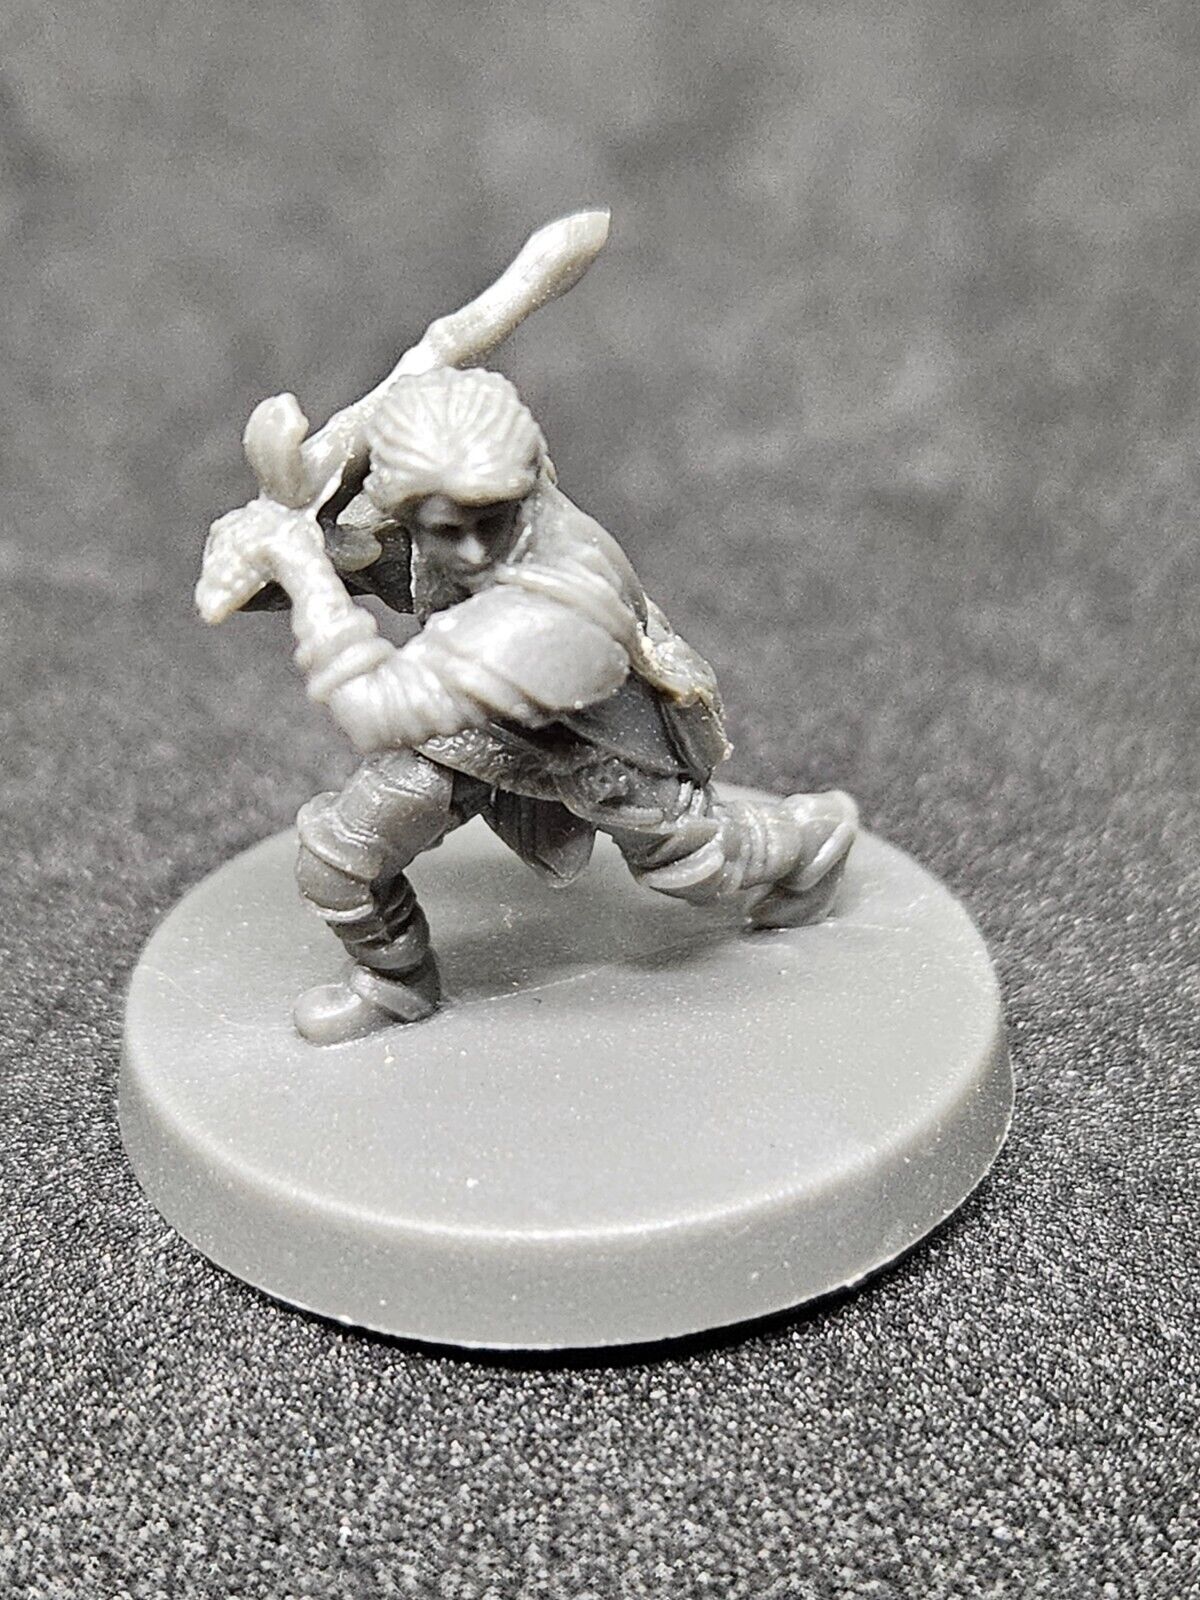 Female Halfling Fighter 28mm PVC Plastic Miniature Dungeons & Dragons Miniature Toy - Hobby Gems